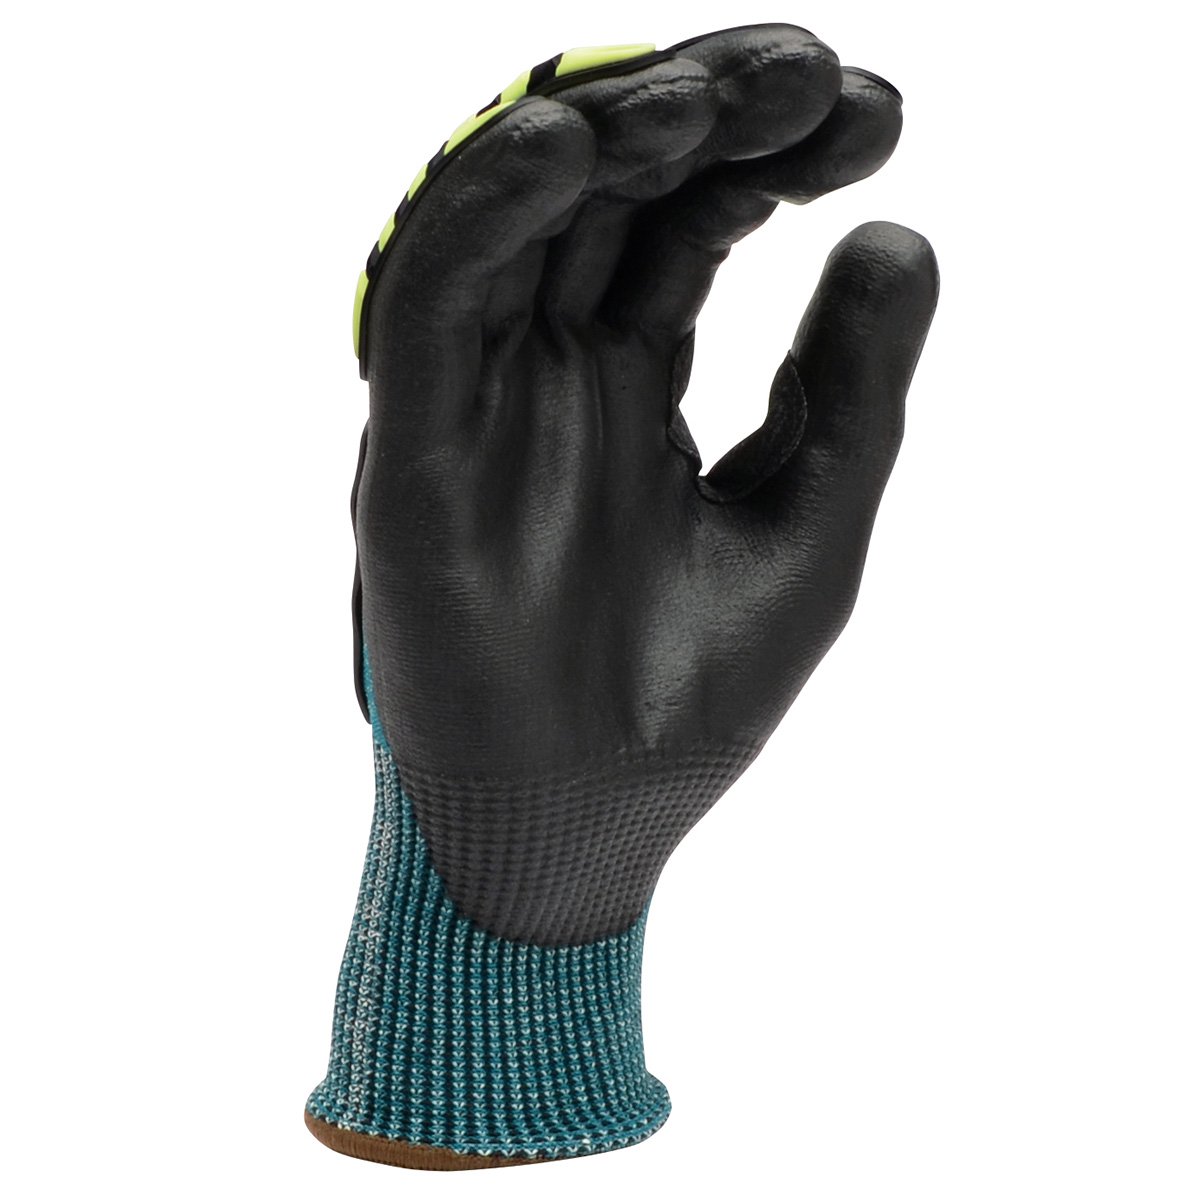 A4 Impact and Cut Resistant Gloves - Walker's